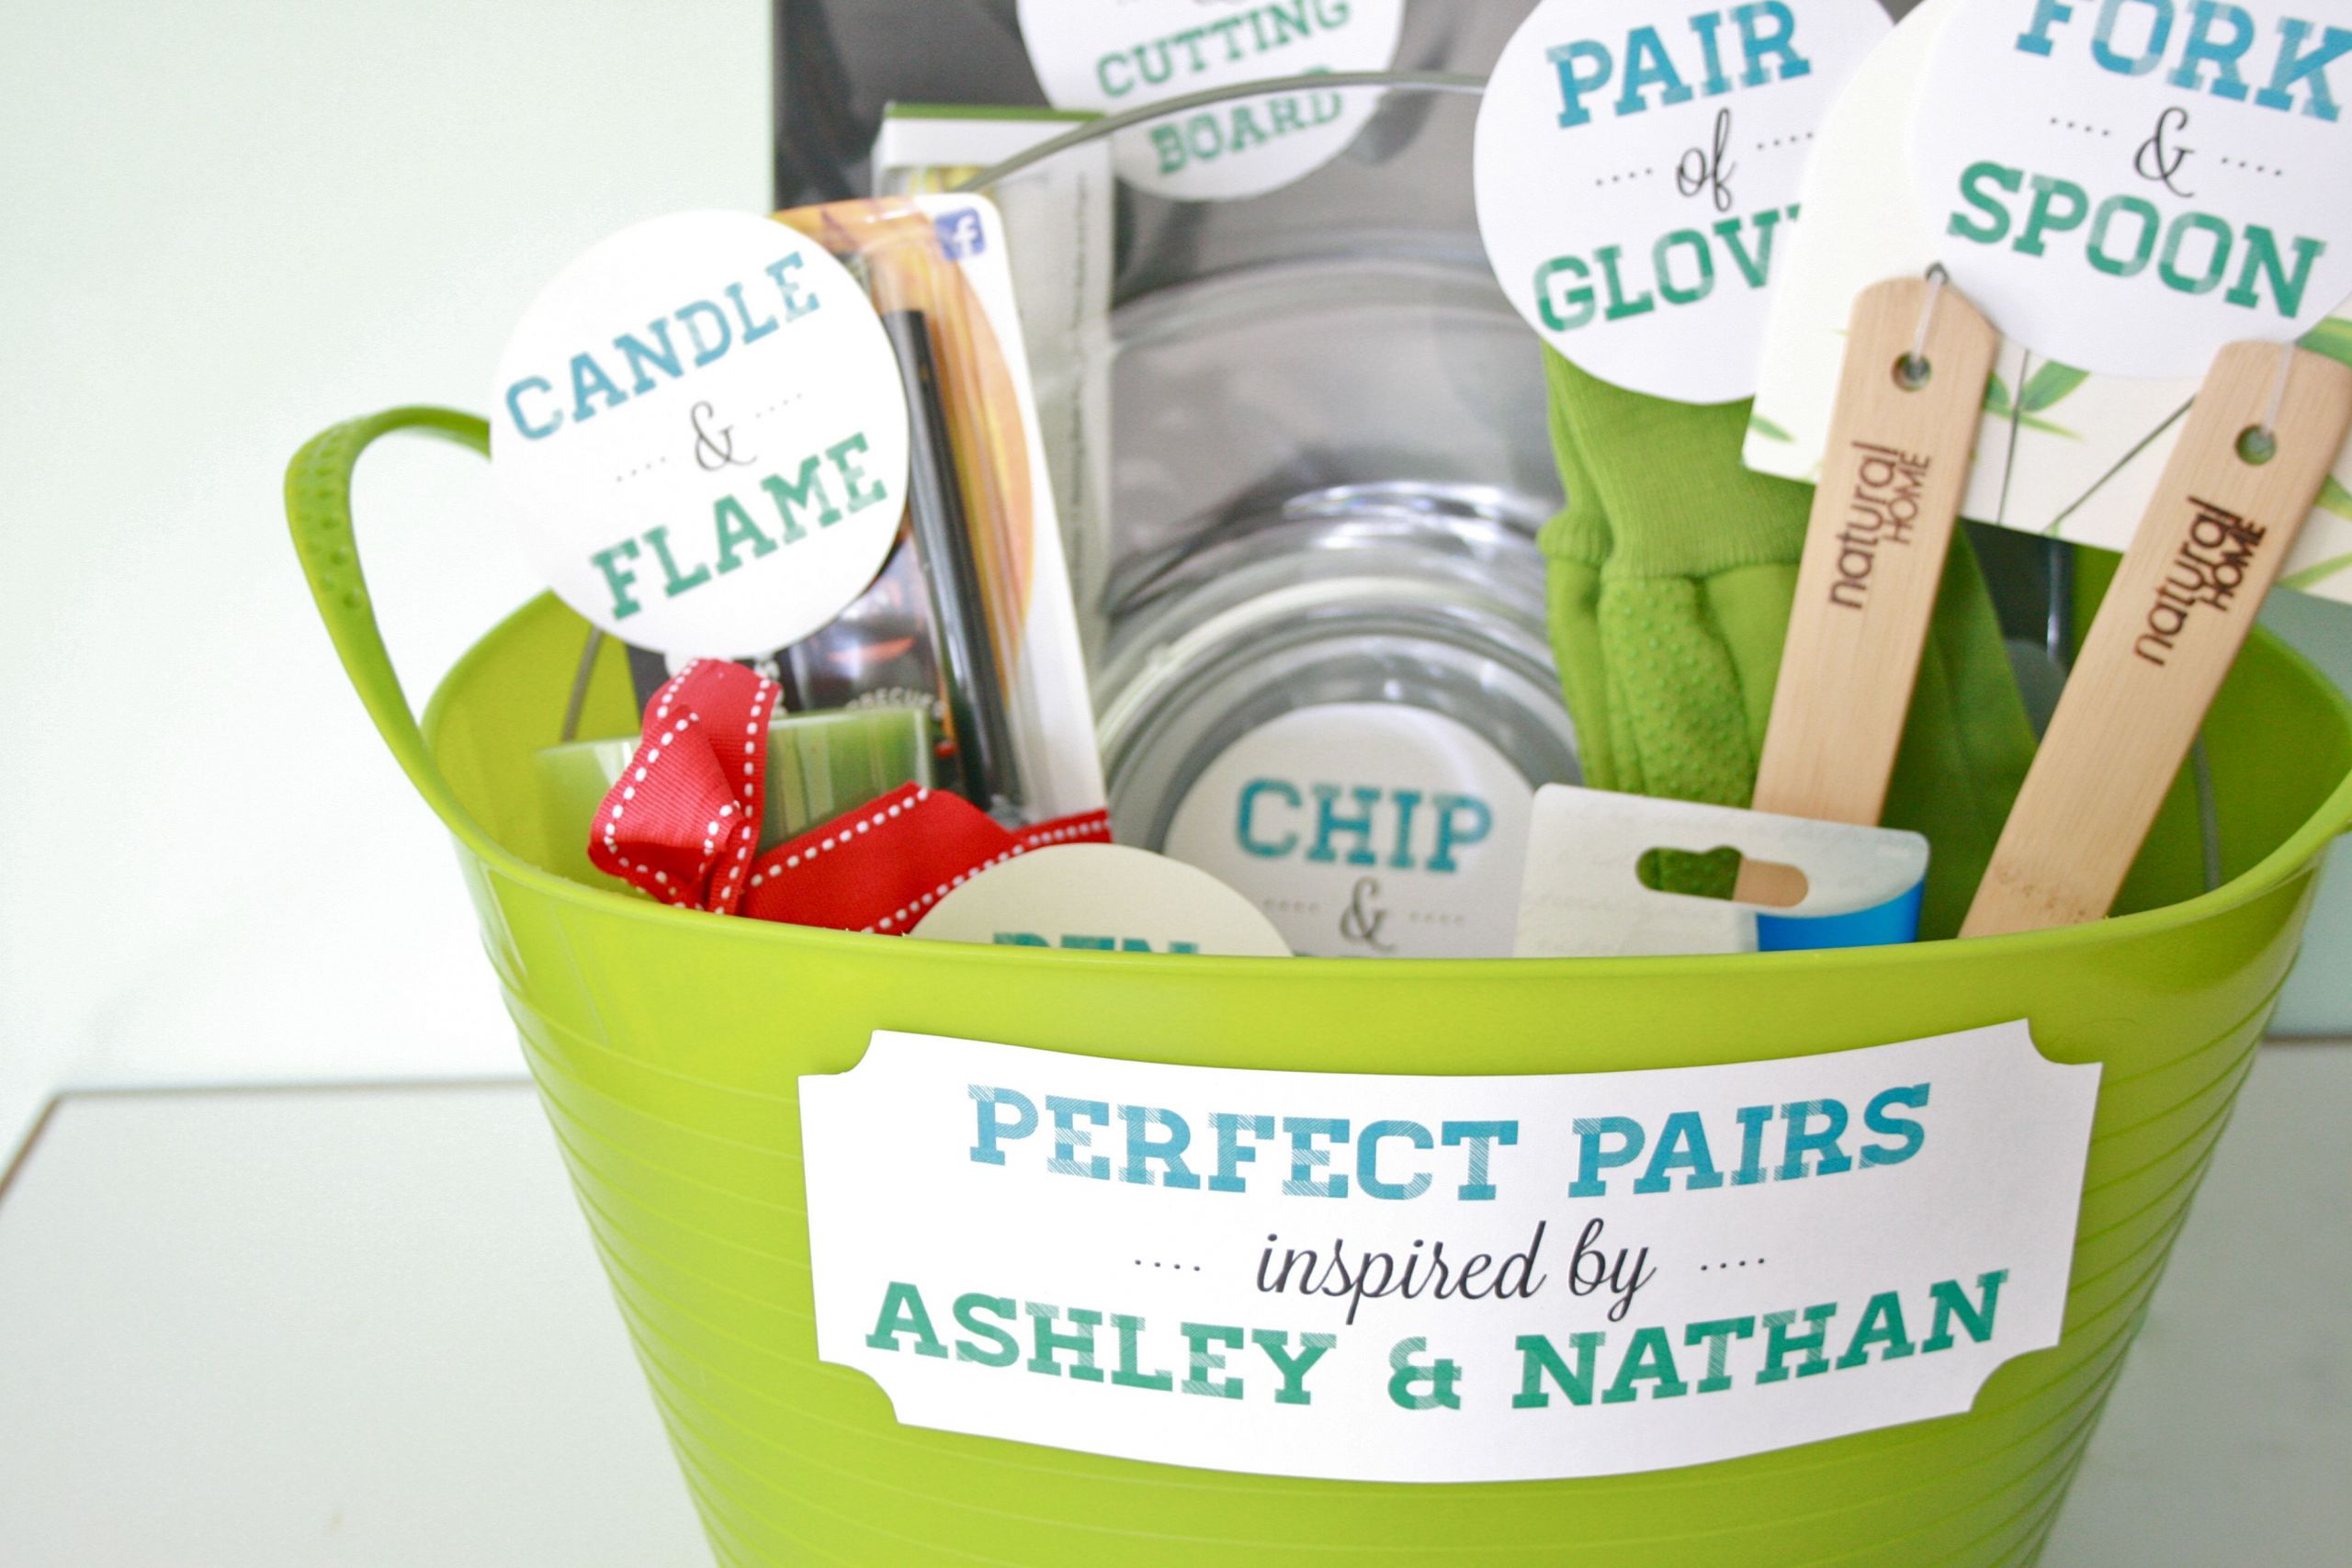 Couples Wedding Shower Gift Ideas
 DIY "Perfect Pairs" Bridal Shower Gift